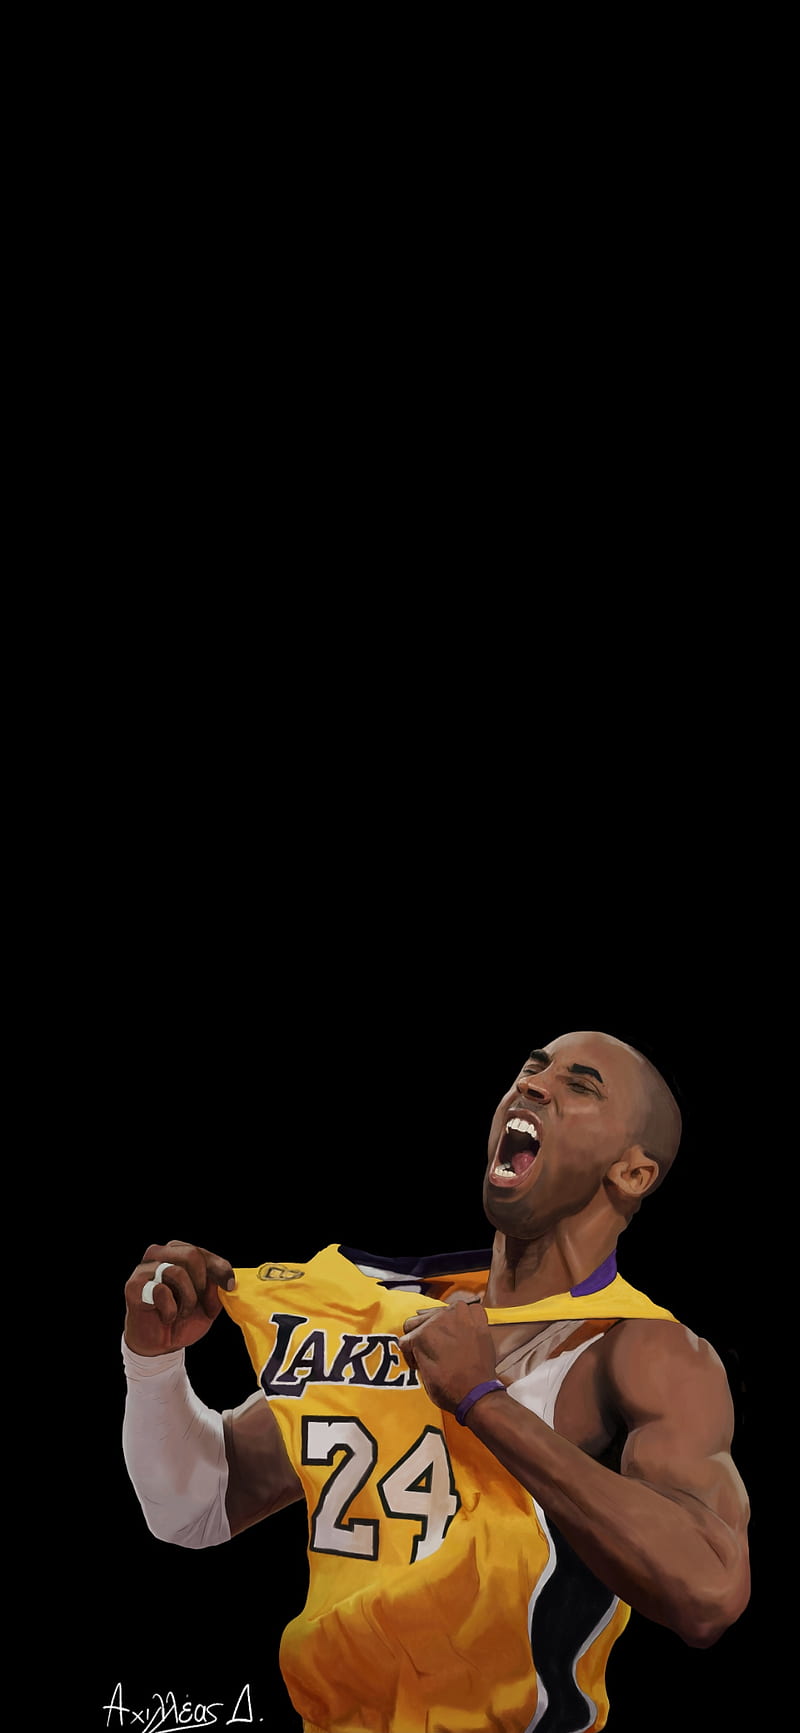 Kobe Bryant Wallpaper Discover more Background, basketball, cool, Desktop,  Iphone wallpapers.